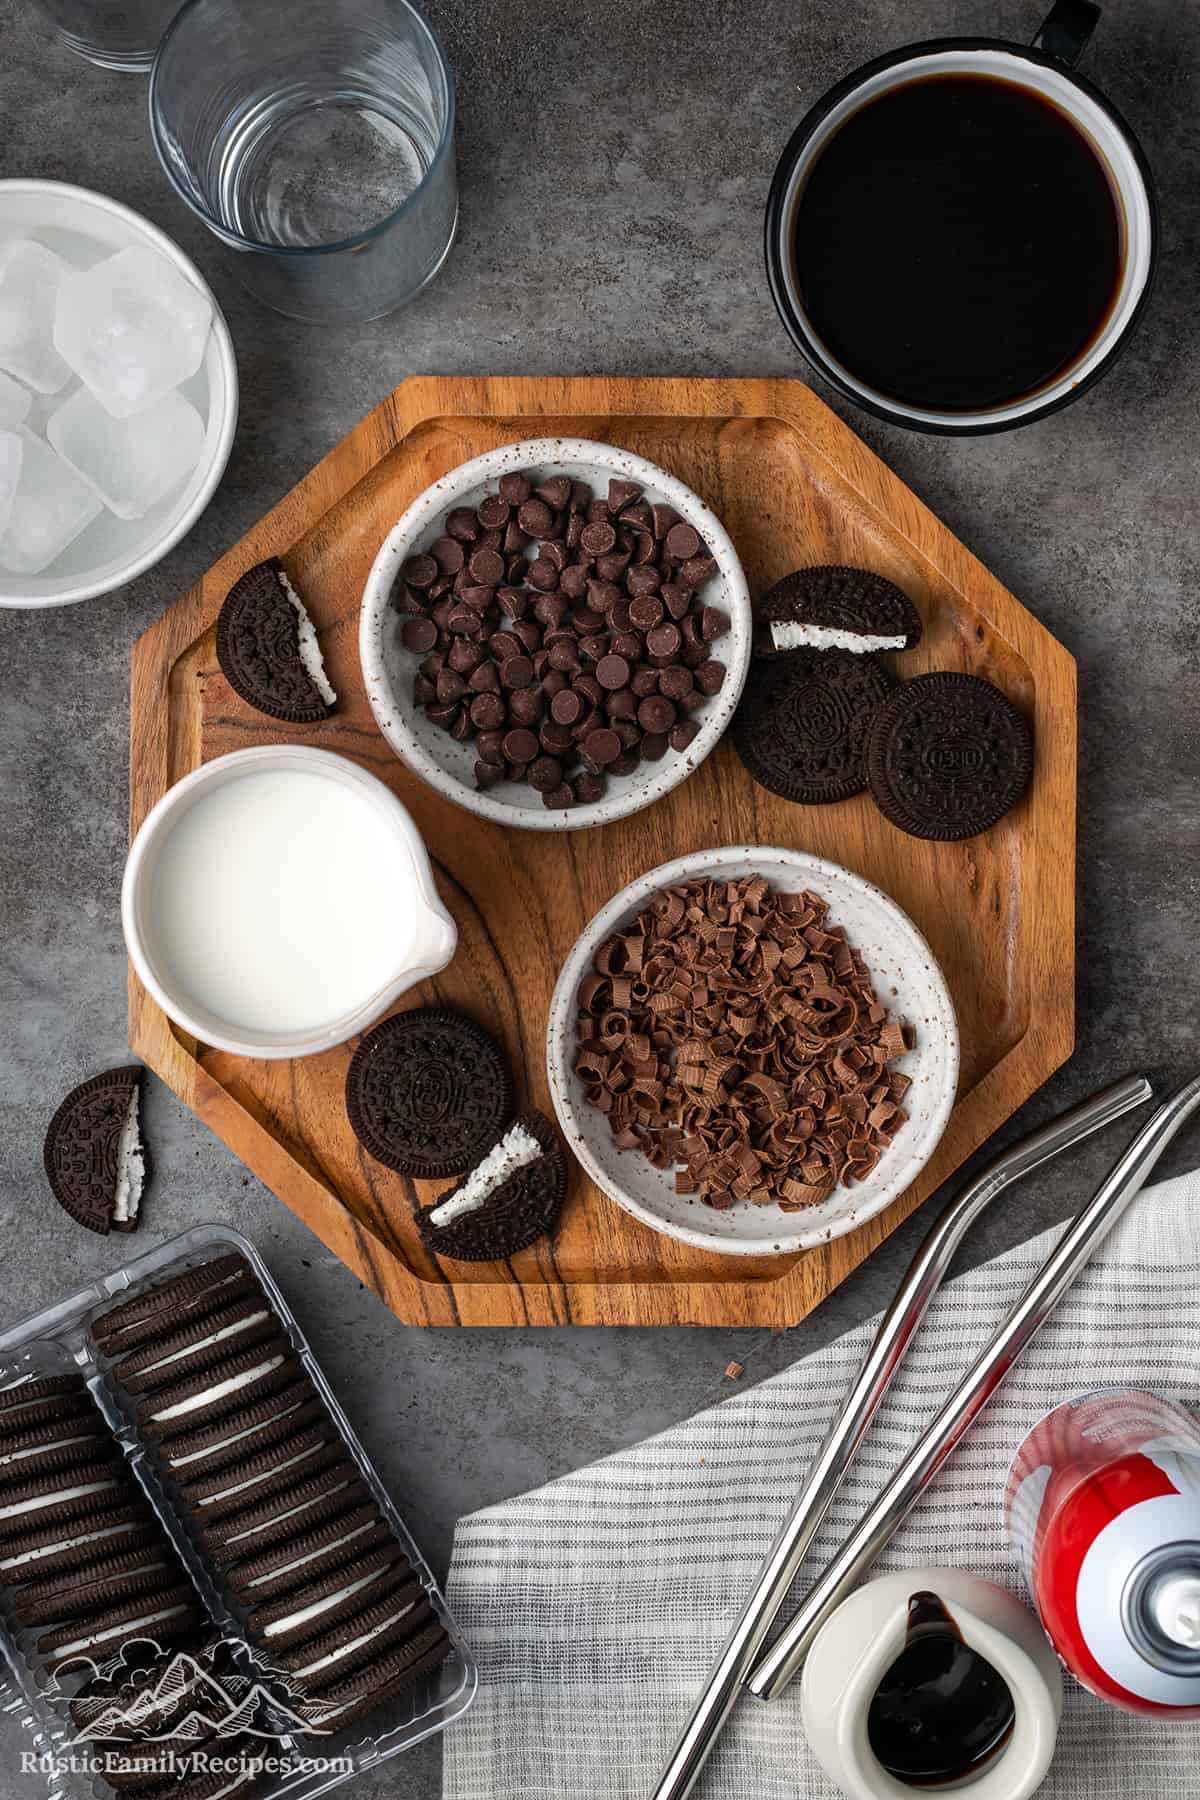 Chocolate chips, Oreo cookies, milk and other frappucino ingredients on a wood board